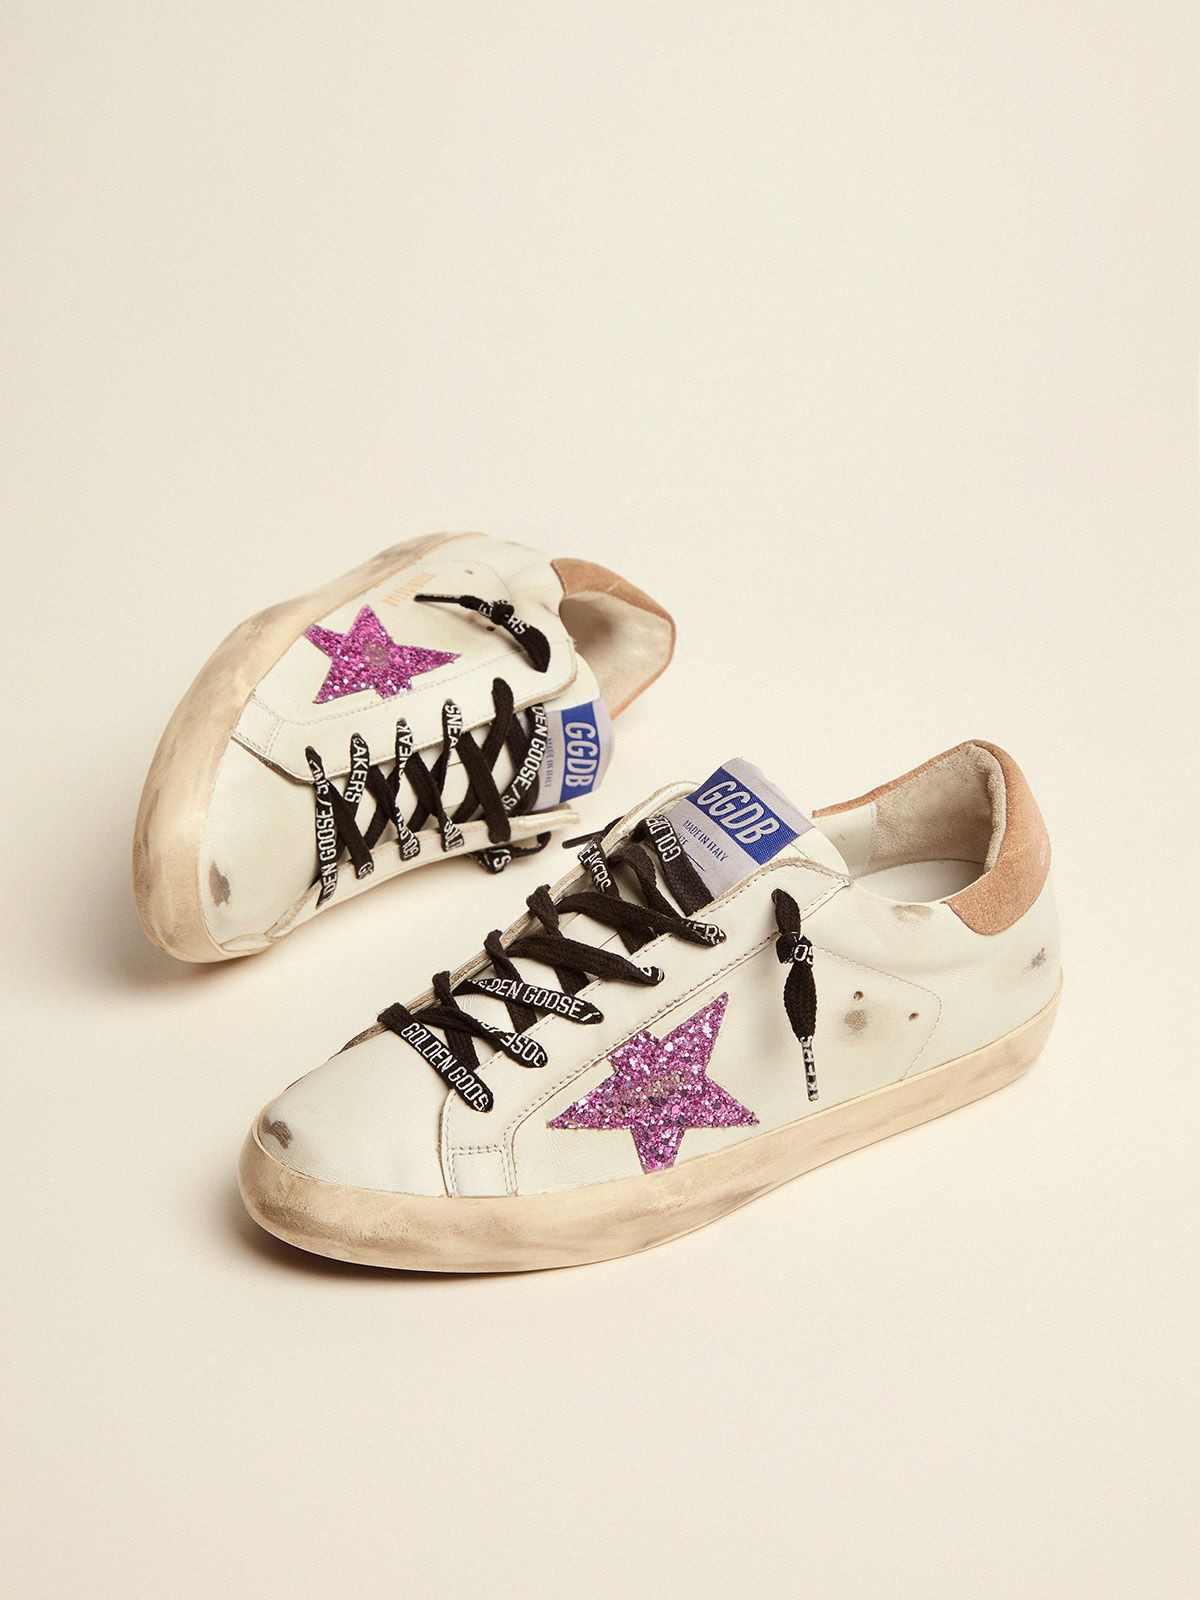 Super-Star sneakers in white leather with lavender-colored glitter 